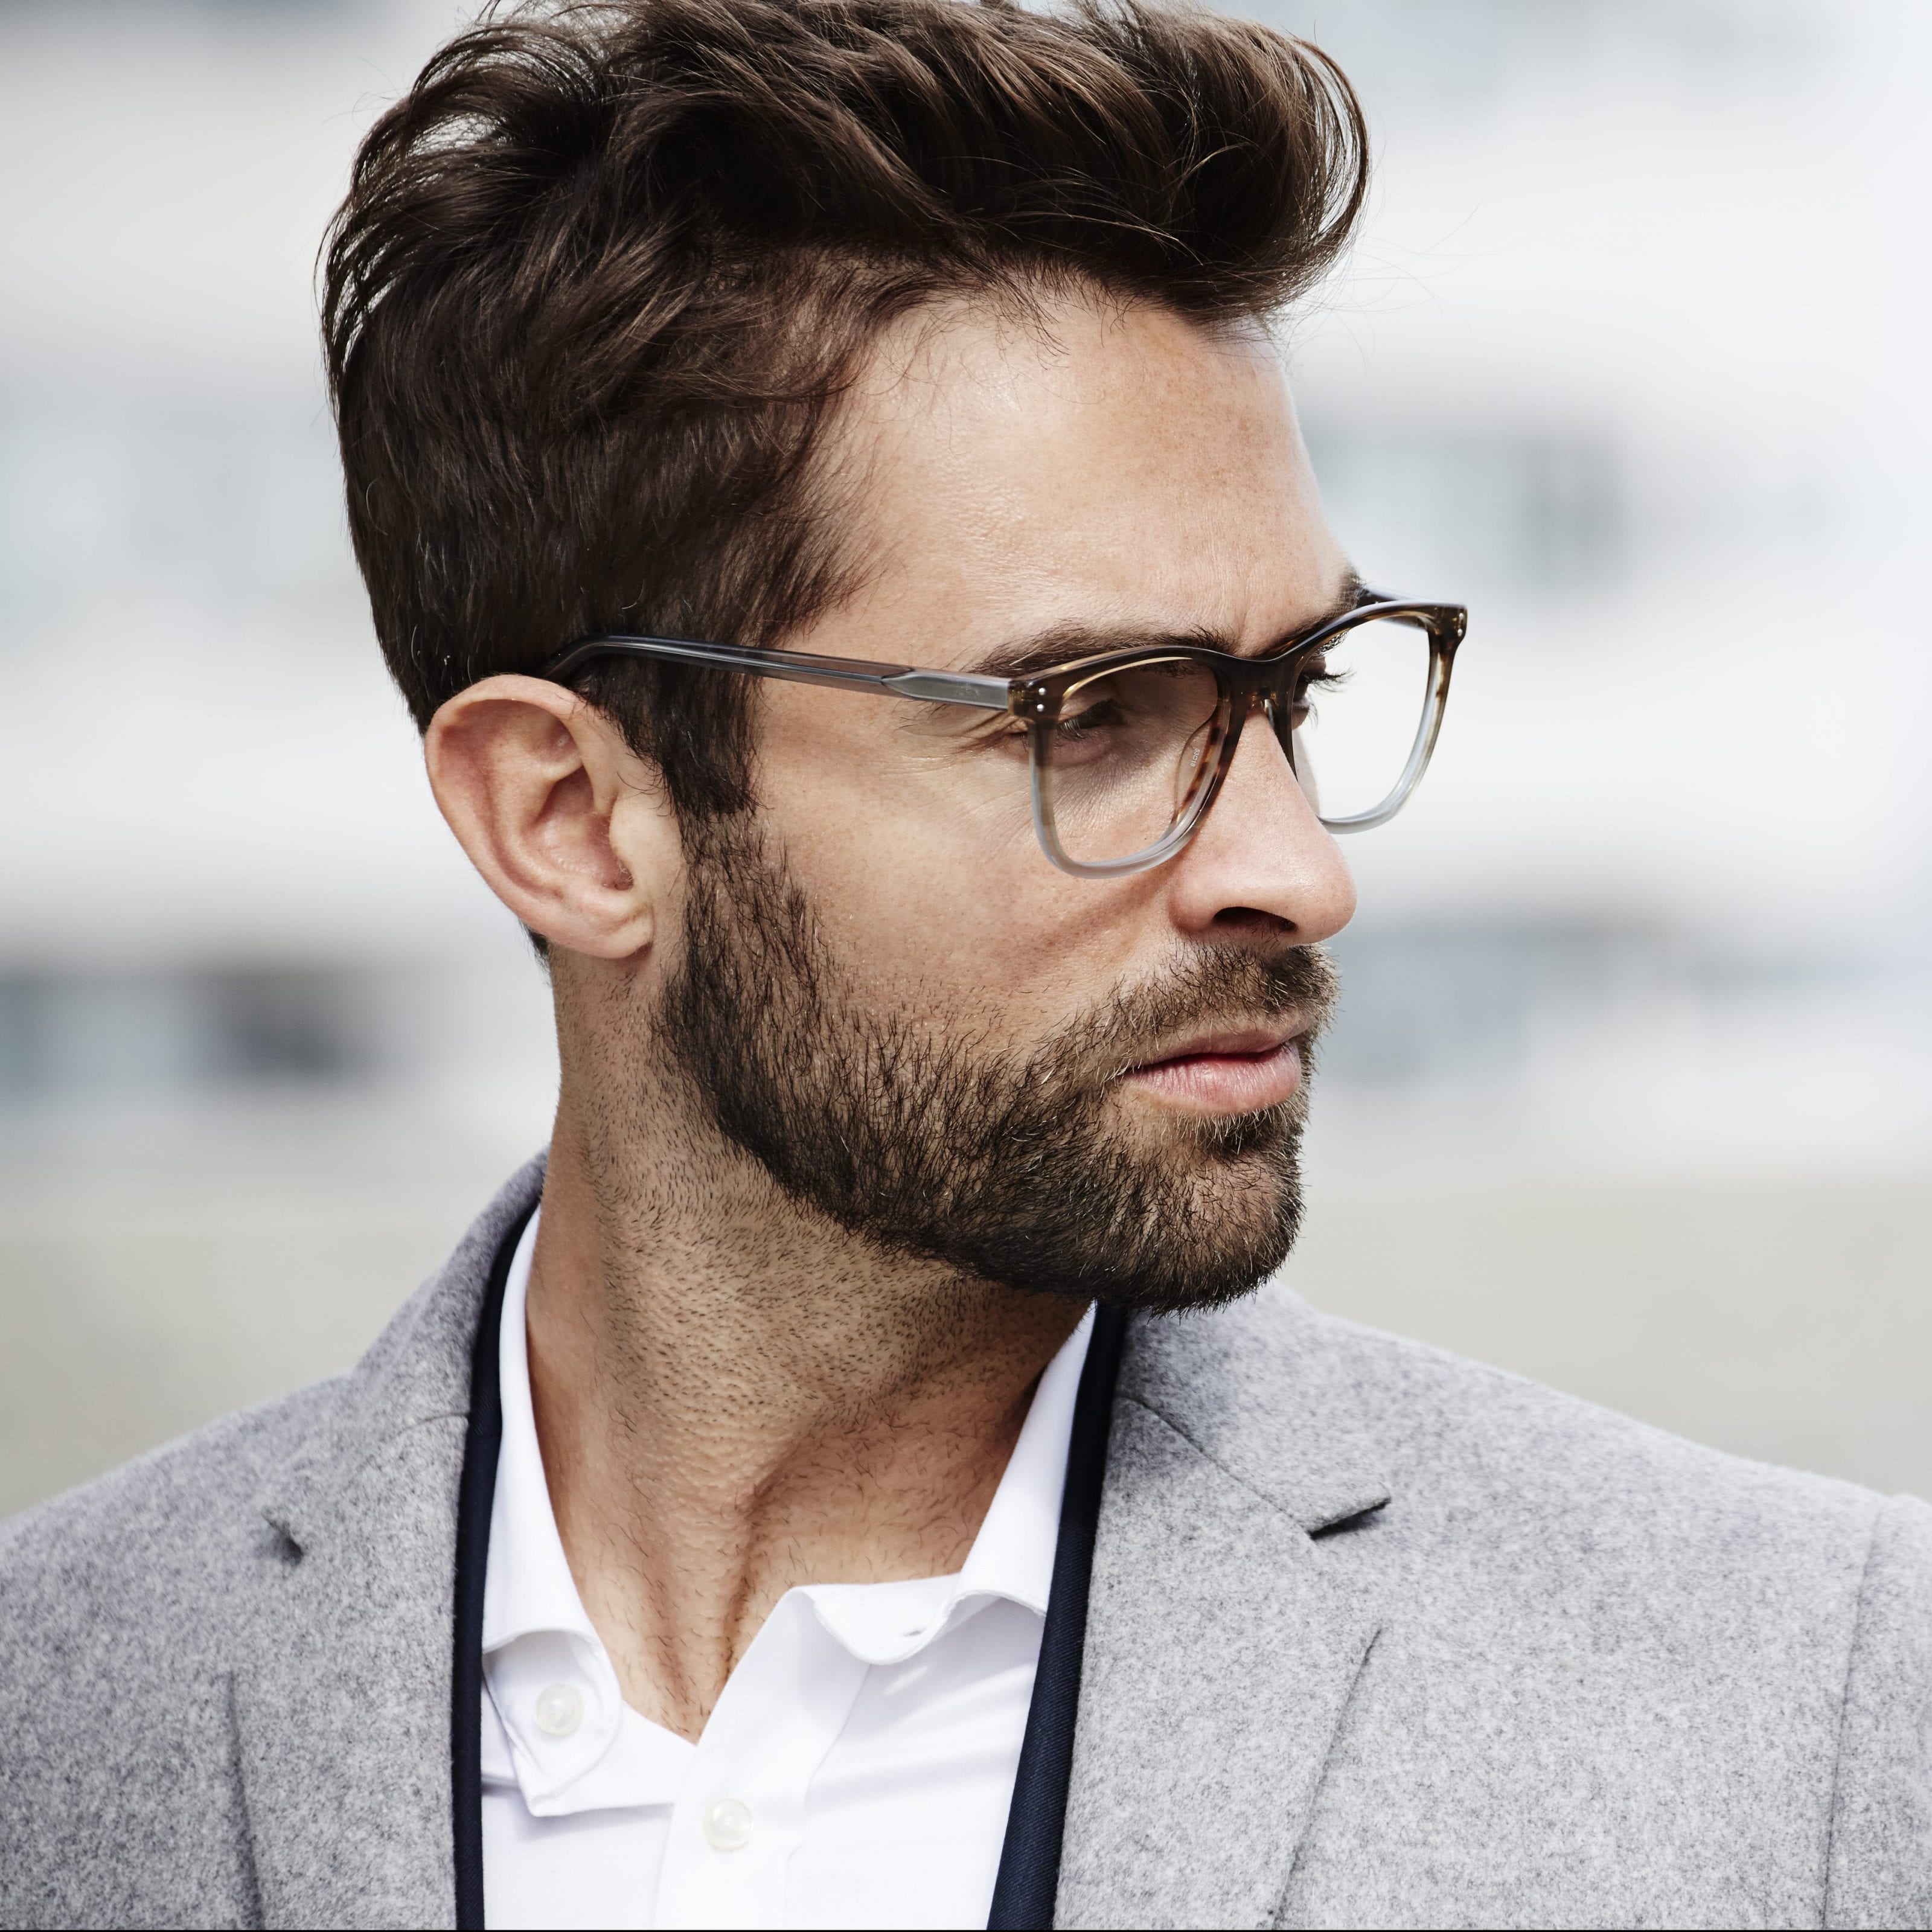 The Ear Tuck Haircut: A Suave Style for Modern-Day Gentlemen